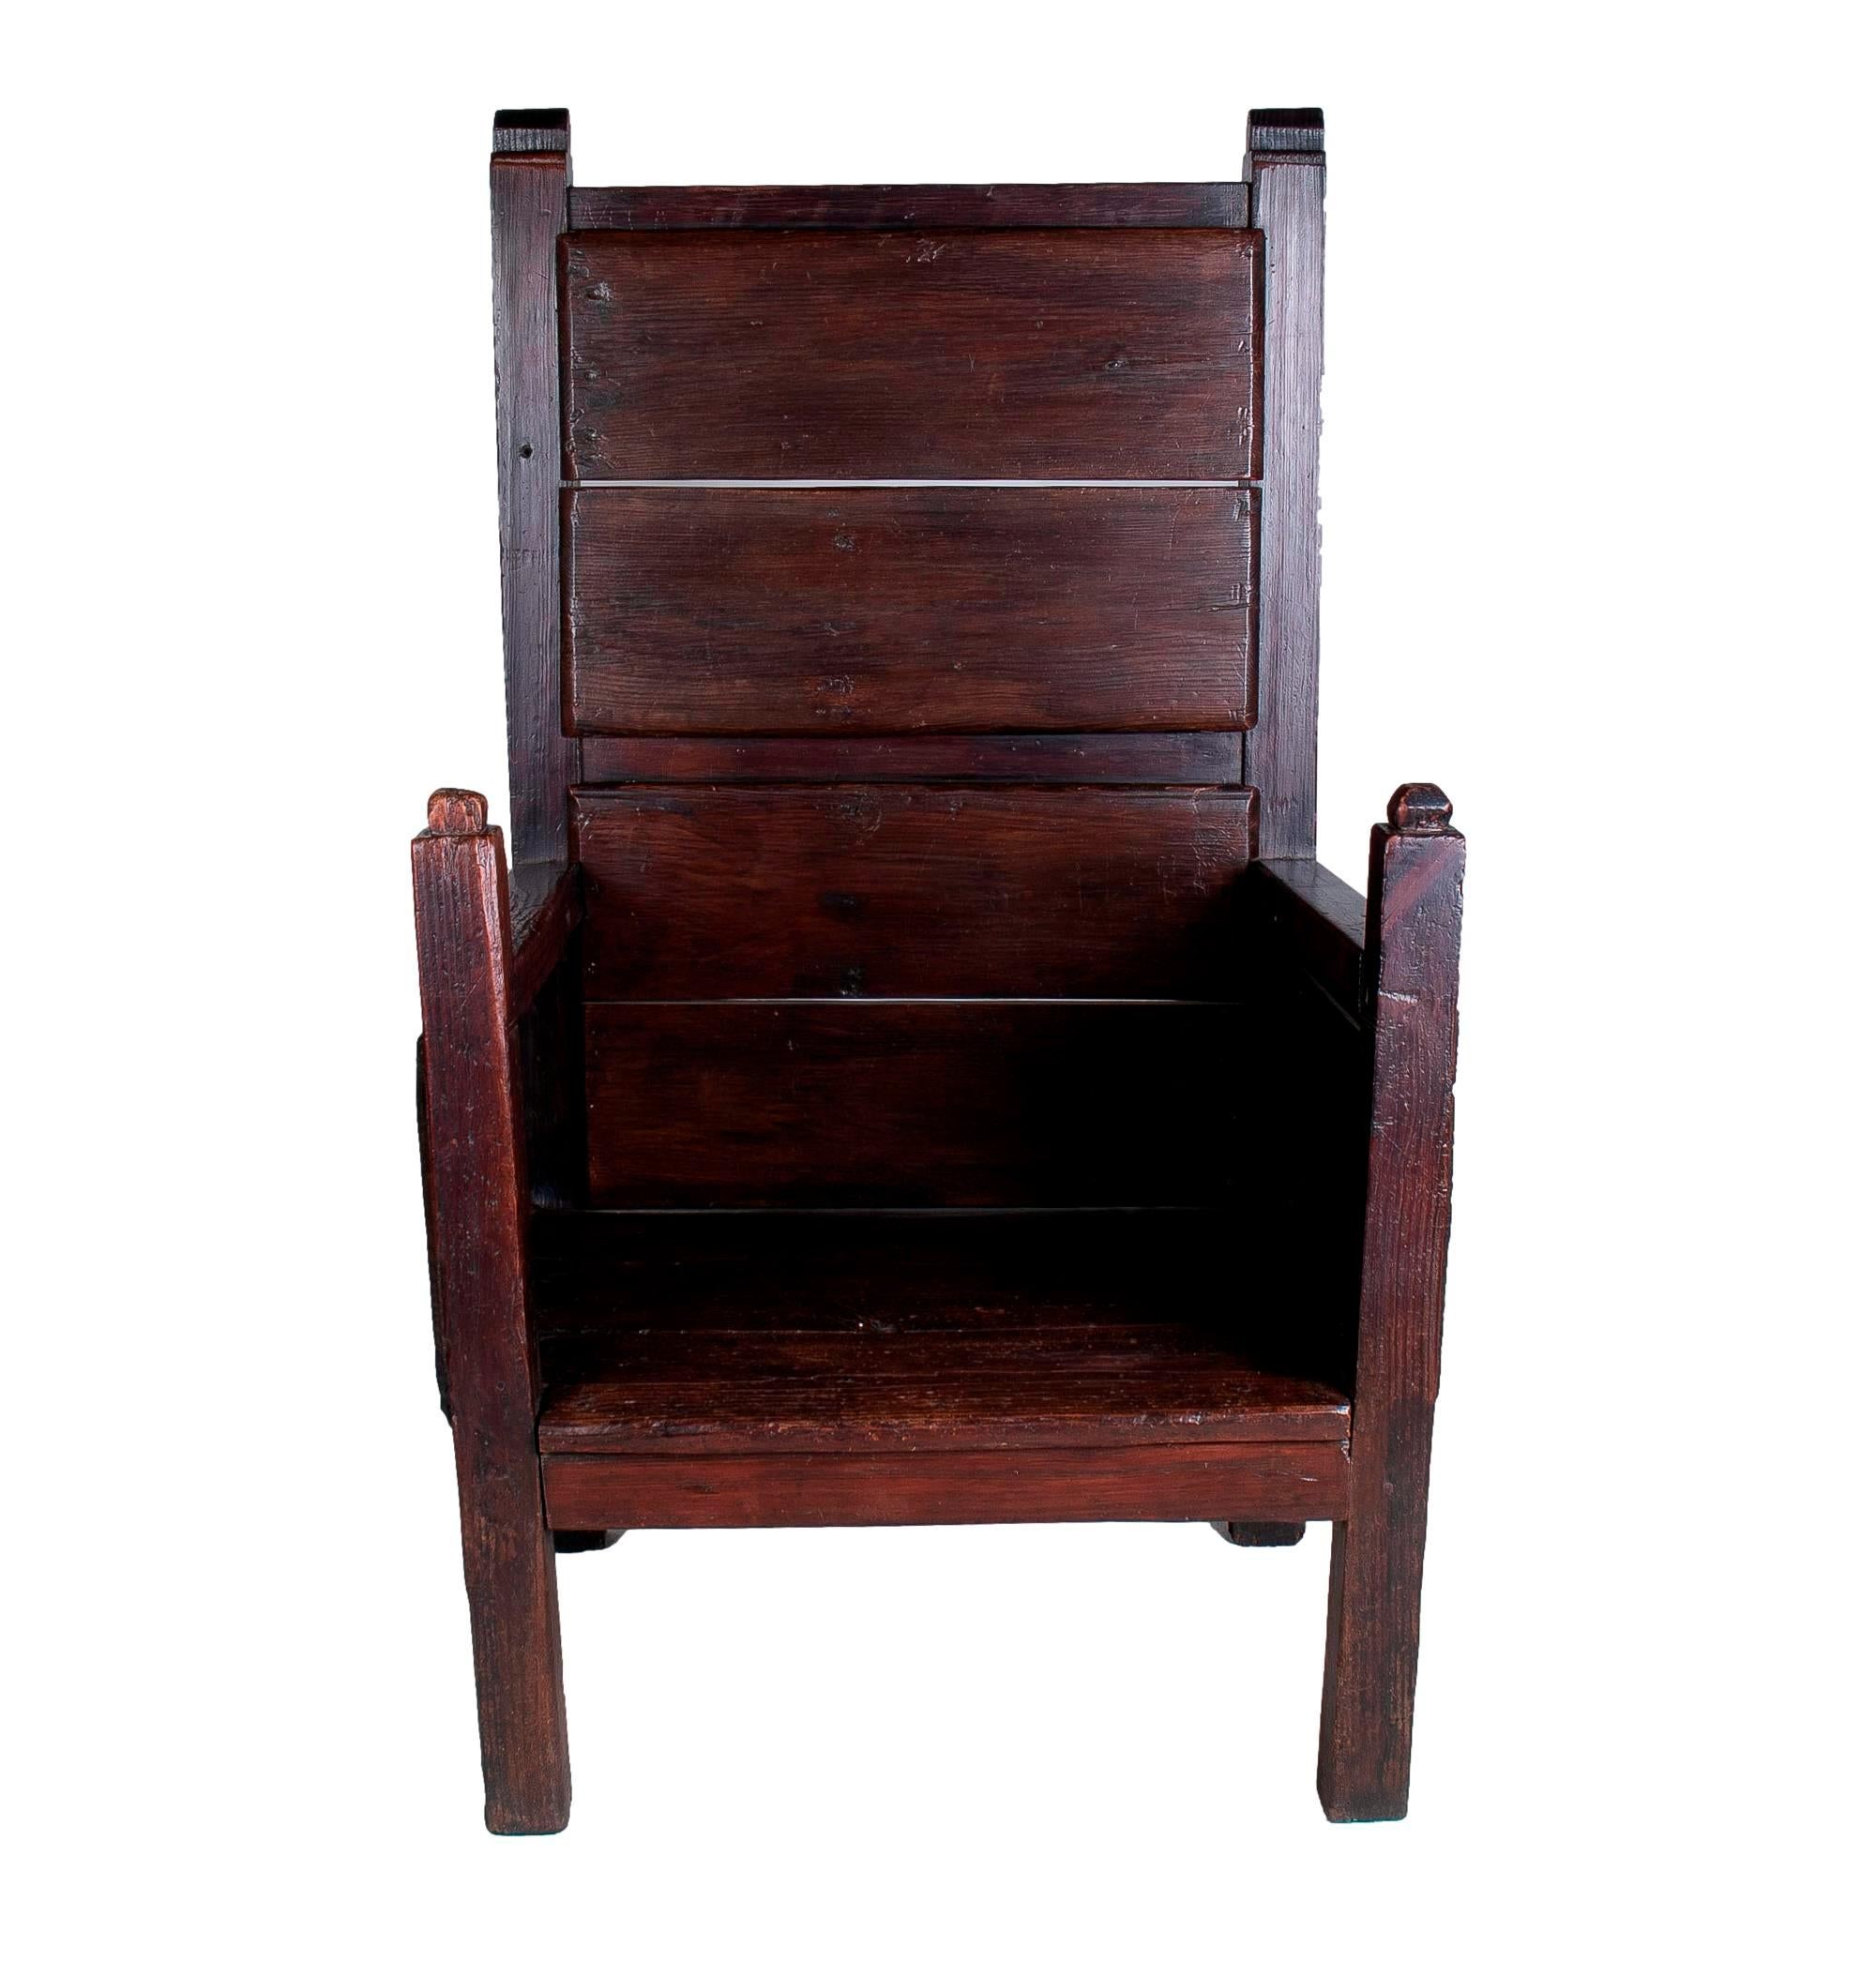 Rustic 19th century Spanish handmade wooden sofa chair with tall back rest.